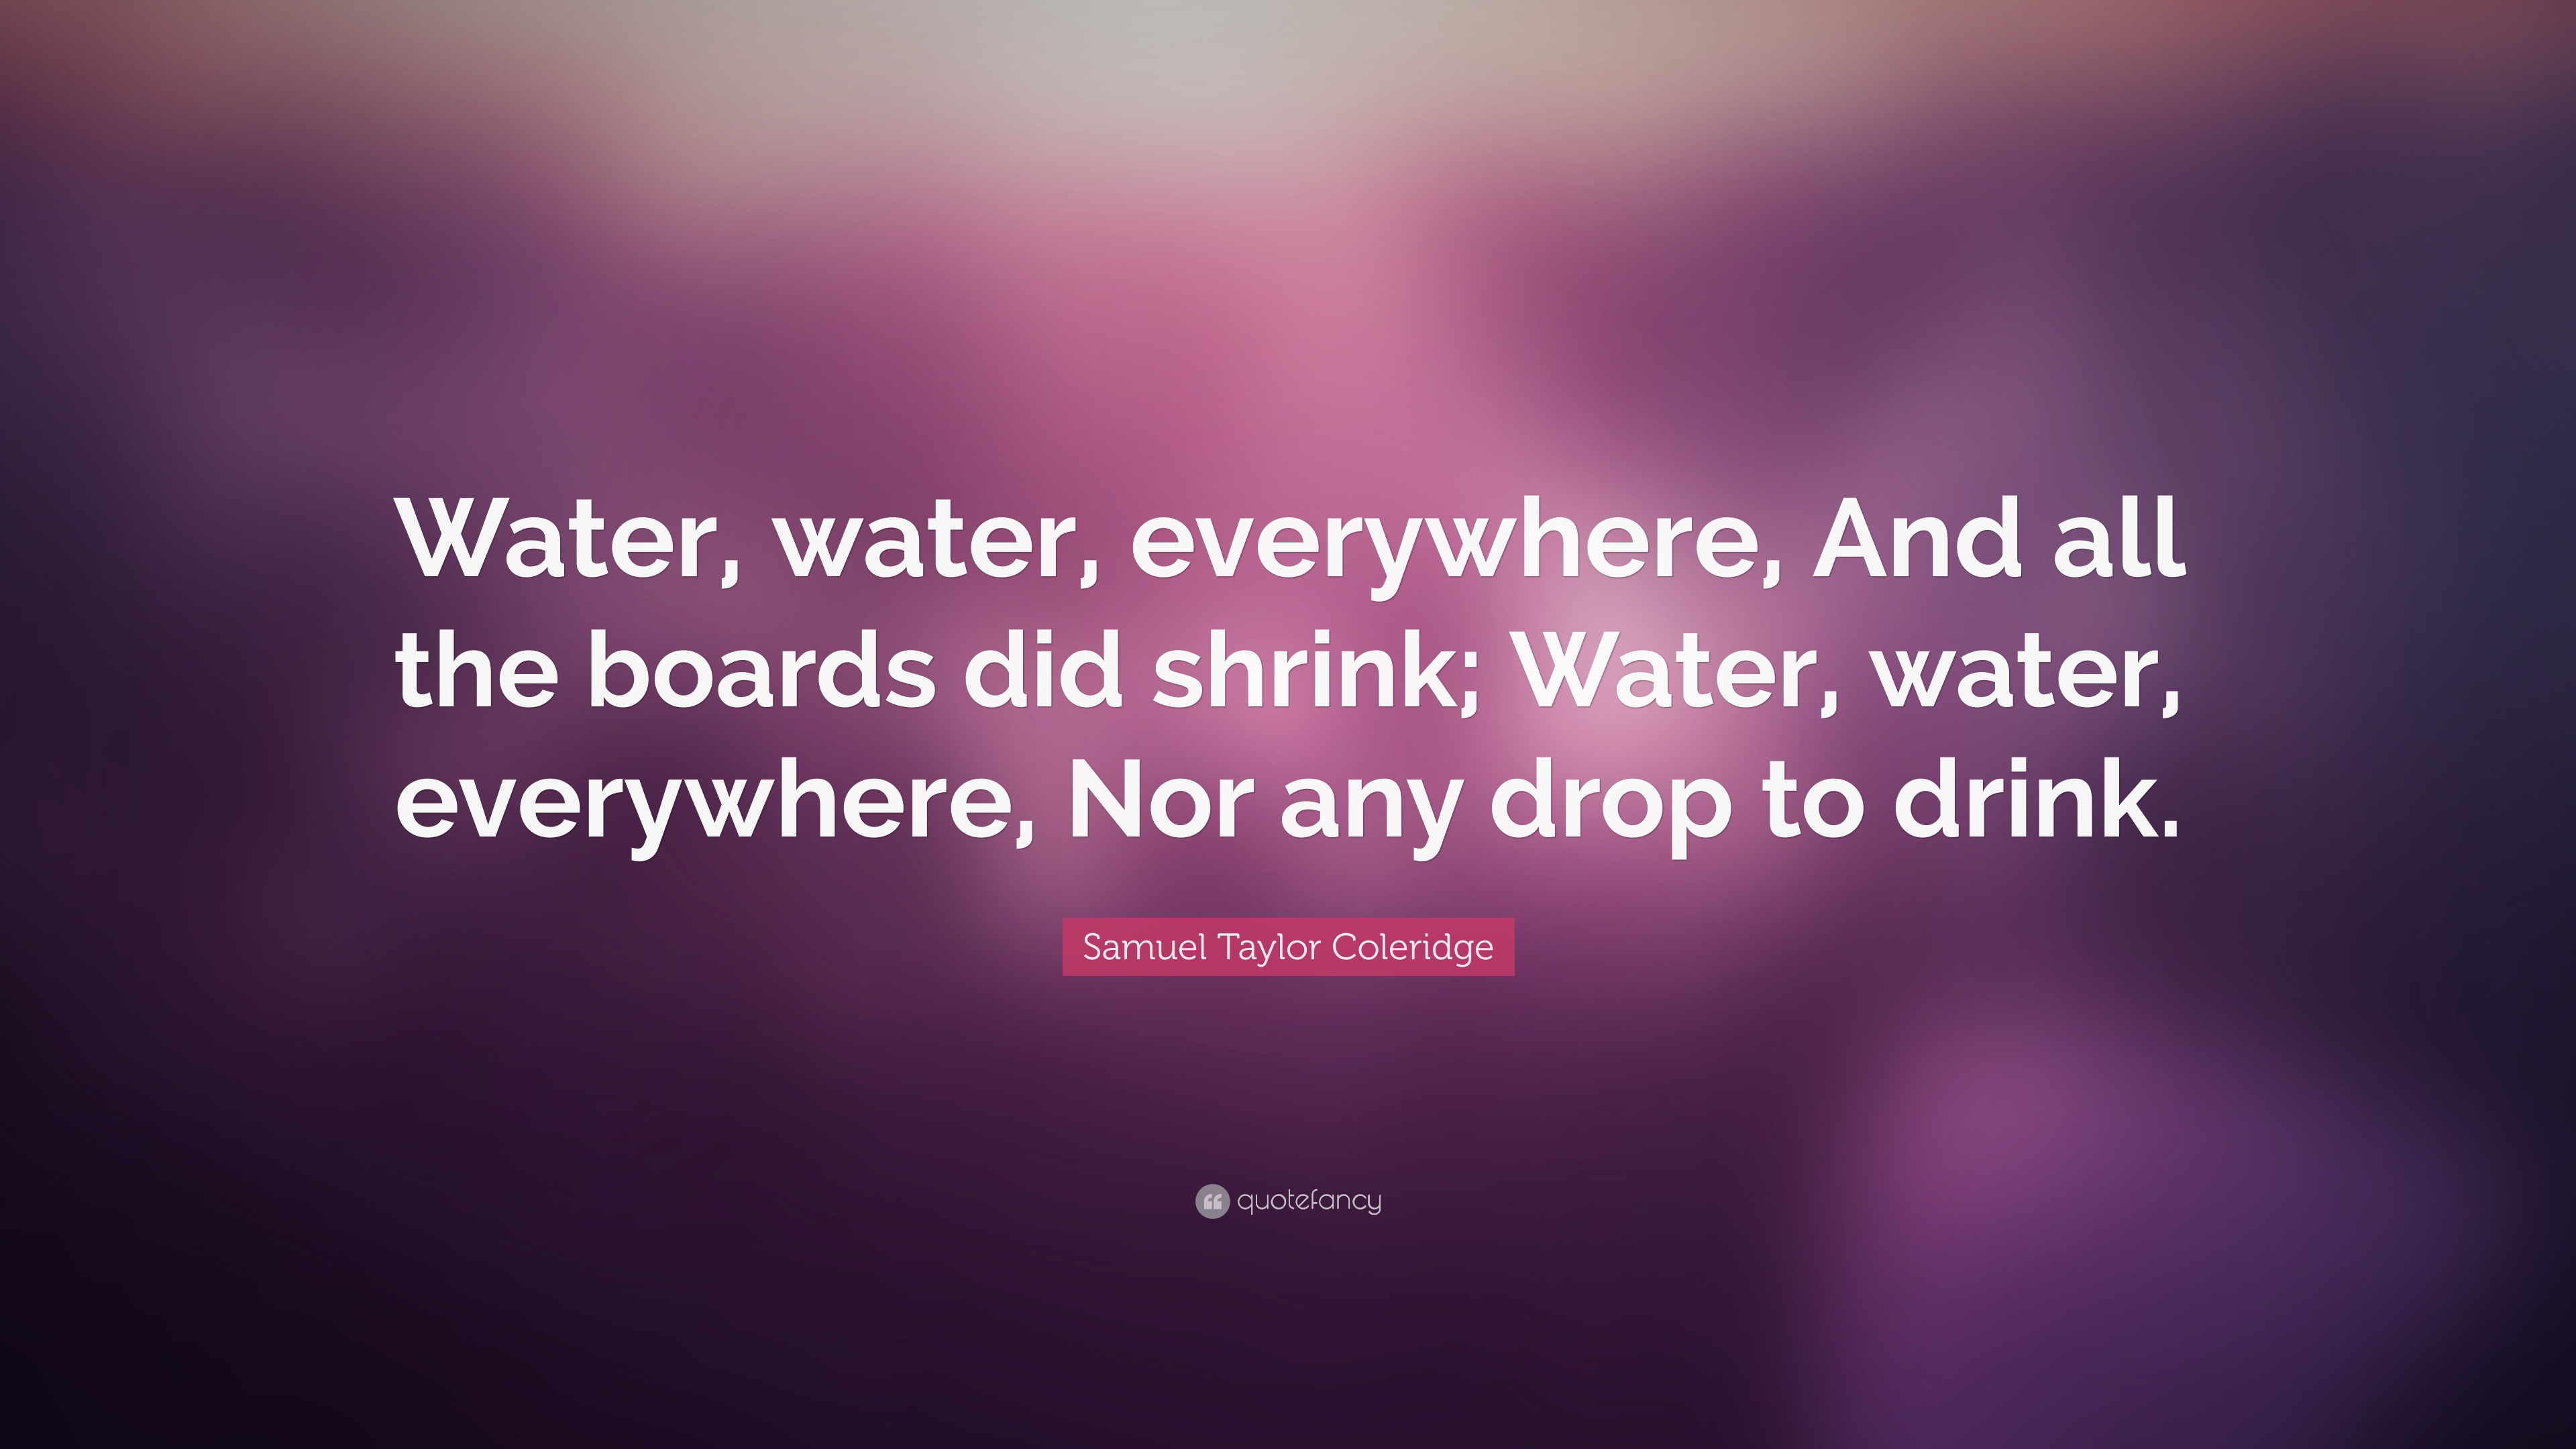 Samuel Taylor Coleridge Quote: “Water, water, everywhere, And all ...